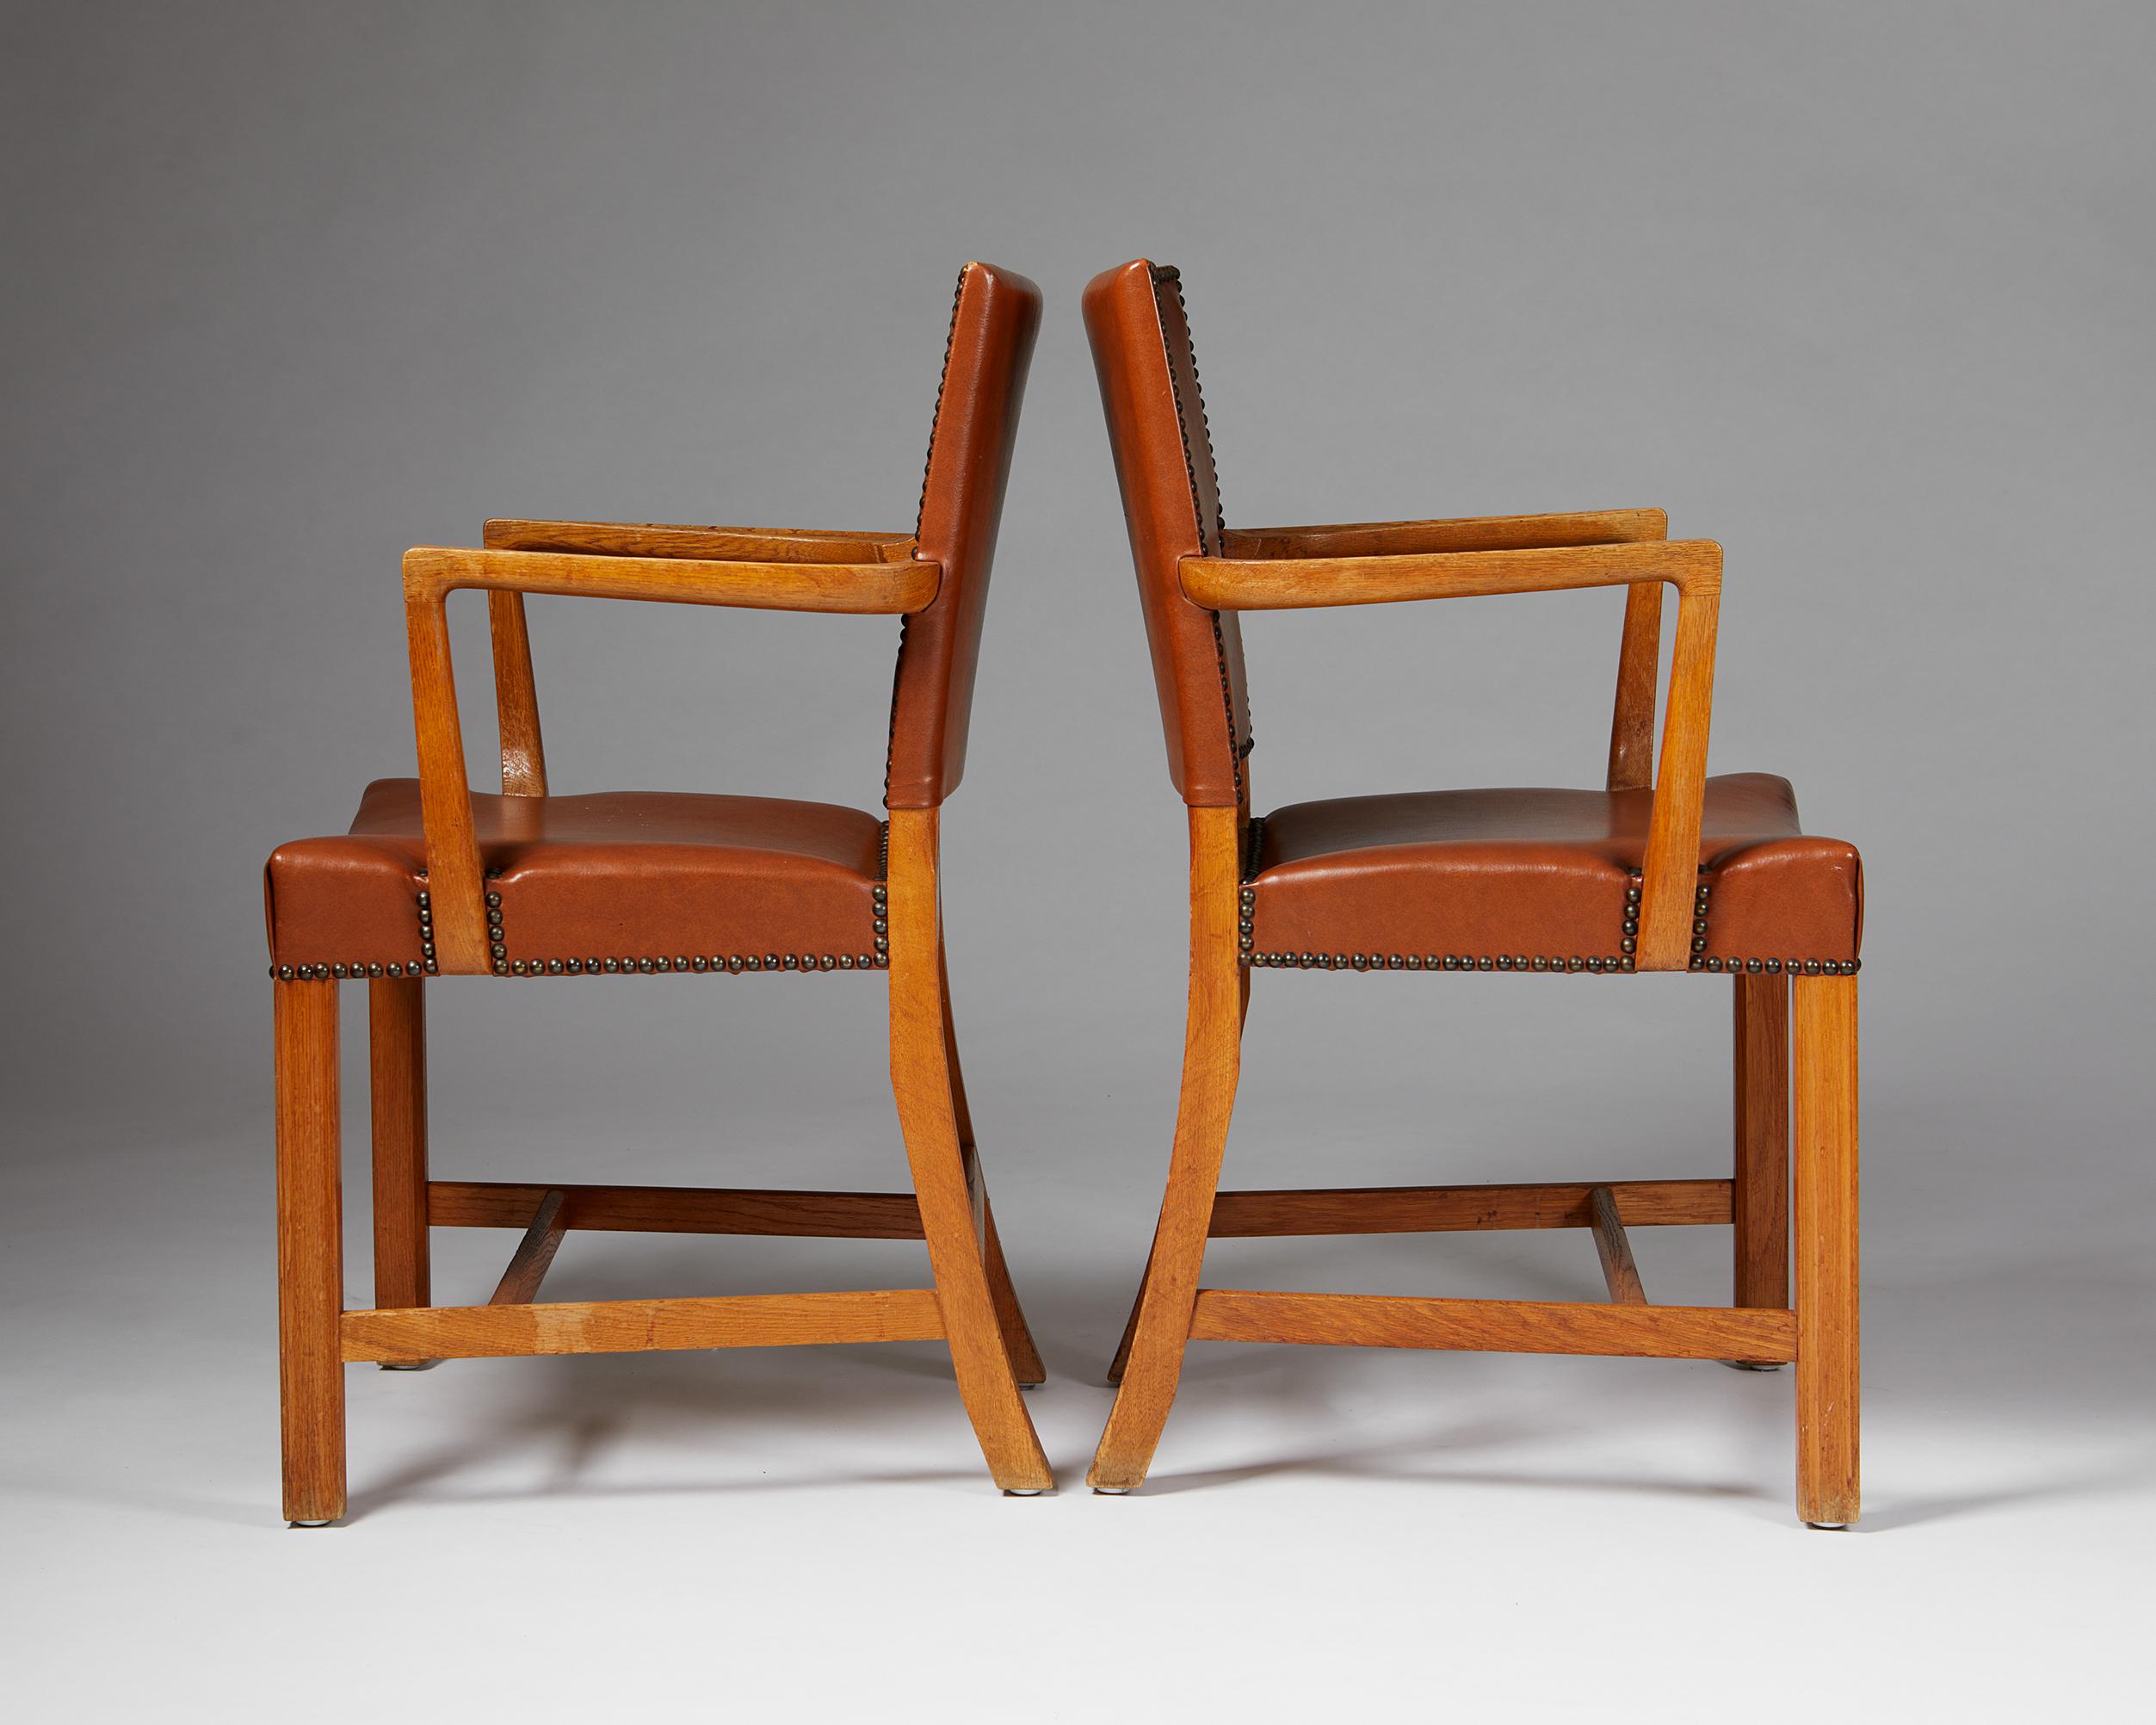 20th Century Pair of Armchairs “The Red Chair” Designed by Kaare Klint for Rud. Rasmussen For Sale